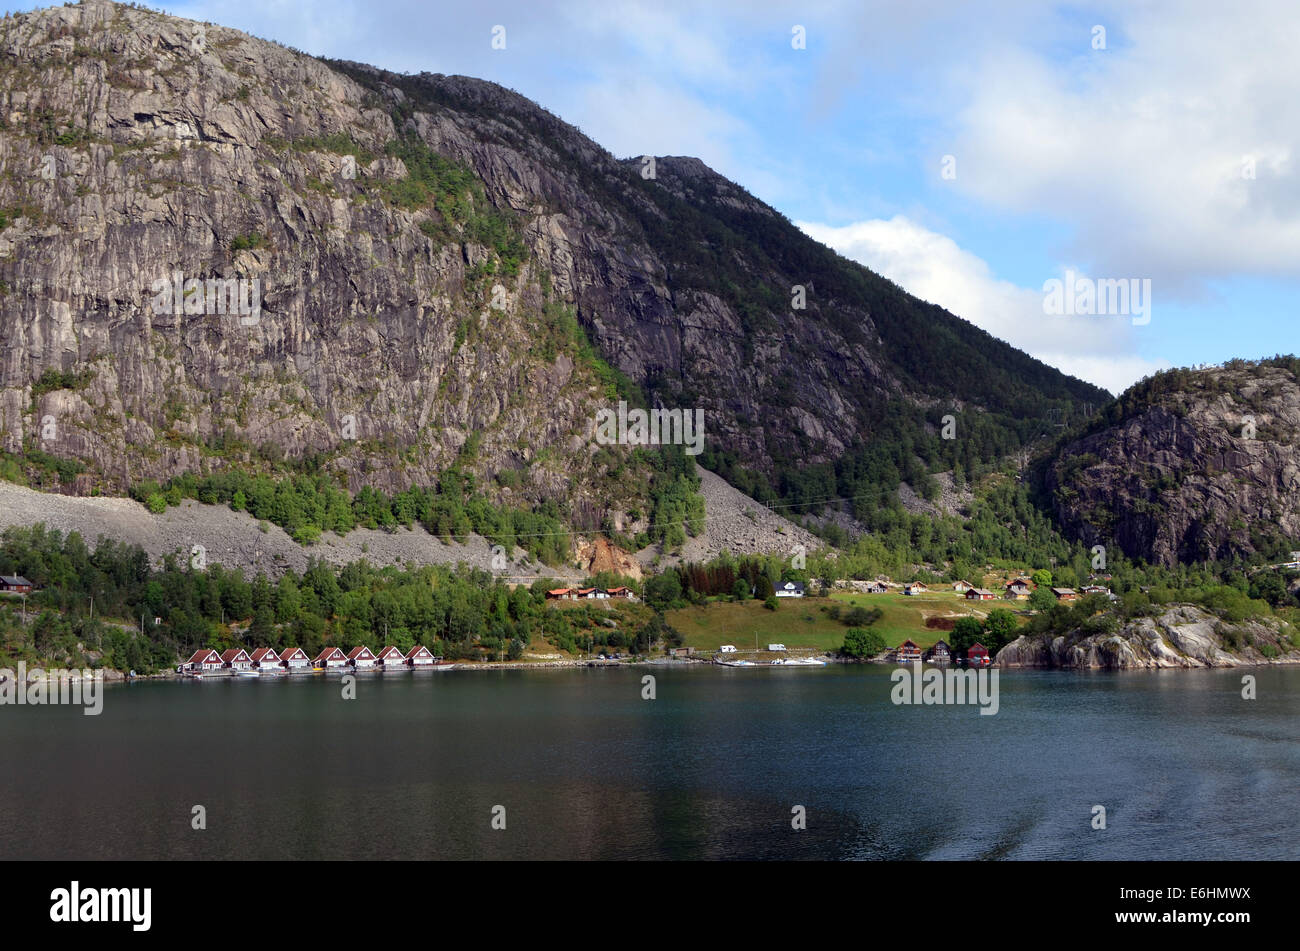 The boat continues down the Norwegian coast, steadily making its way south,past the small islands. Stock Photo